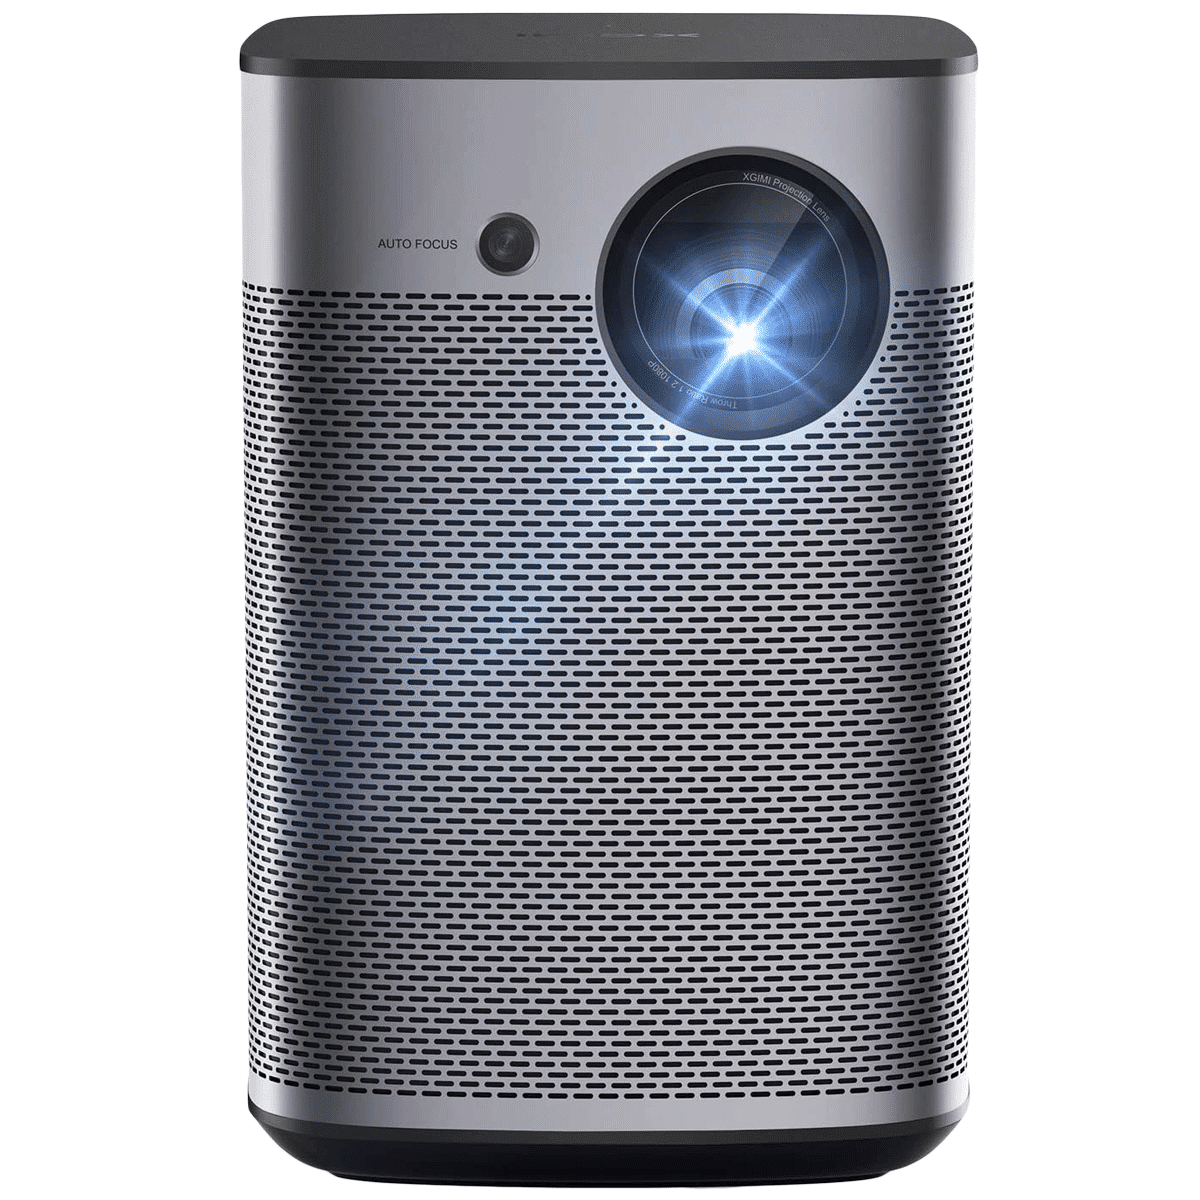 Buy XGIMI Halo 9.0 Aluminium) White ANSI Croma Projector Online and Smart - Android Smart Harman/Kardon Portable Lumens, + 800 Speakers Google with (DLP, 1080p Indoor/Outdoor Assistant, + Projector TV